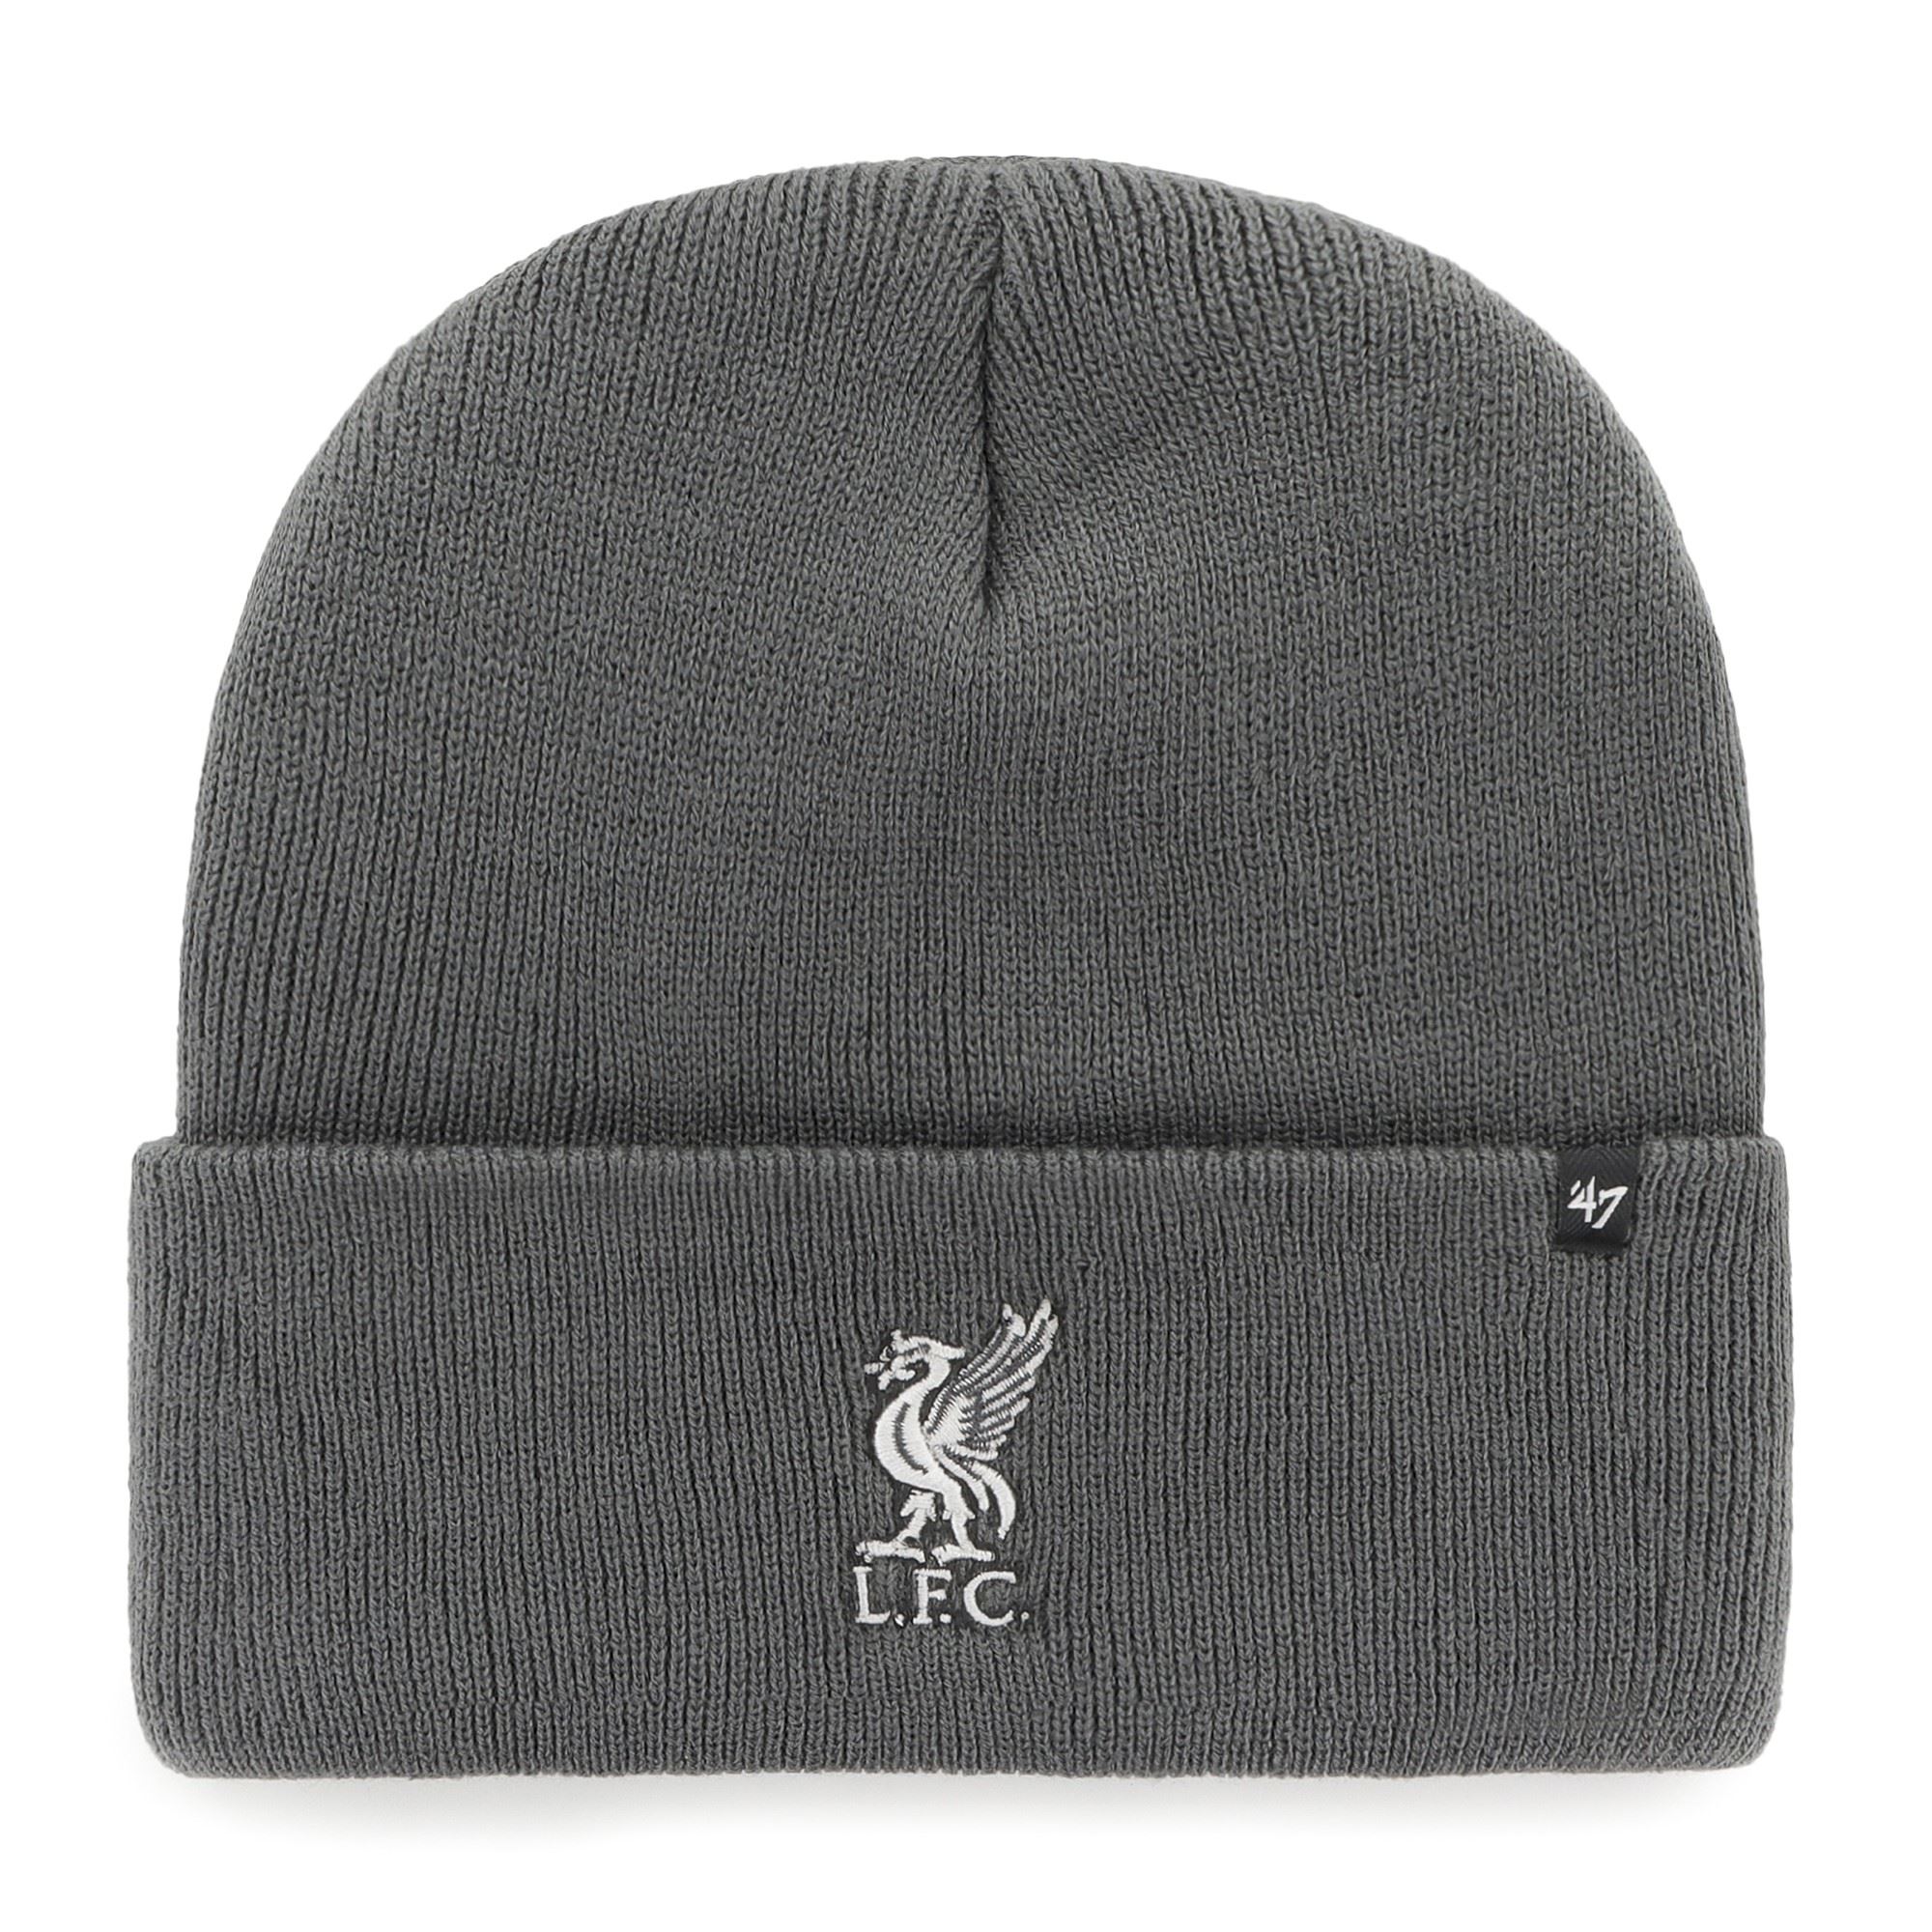 FC Liverpool Charcoal White EPL Haymaker Cuff Knit Beanie '47